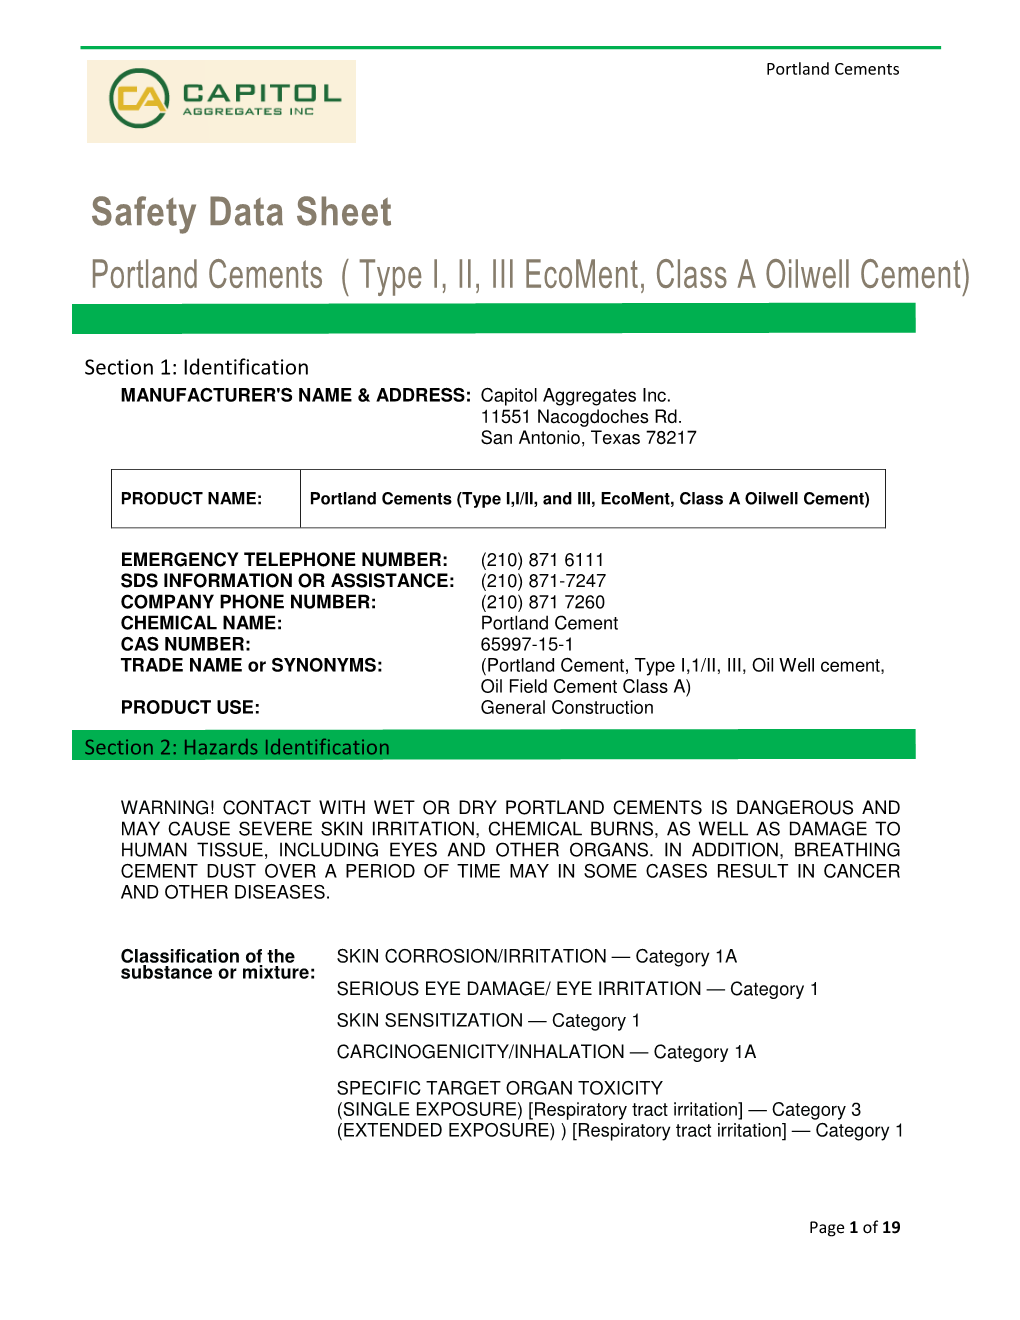 Safety Data Sheet Portland Cements ( Type I, II, III Ecoment, Class a Oilwell Cement)